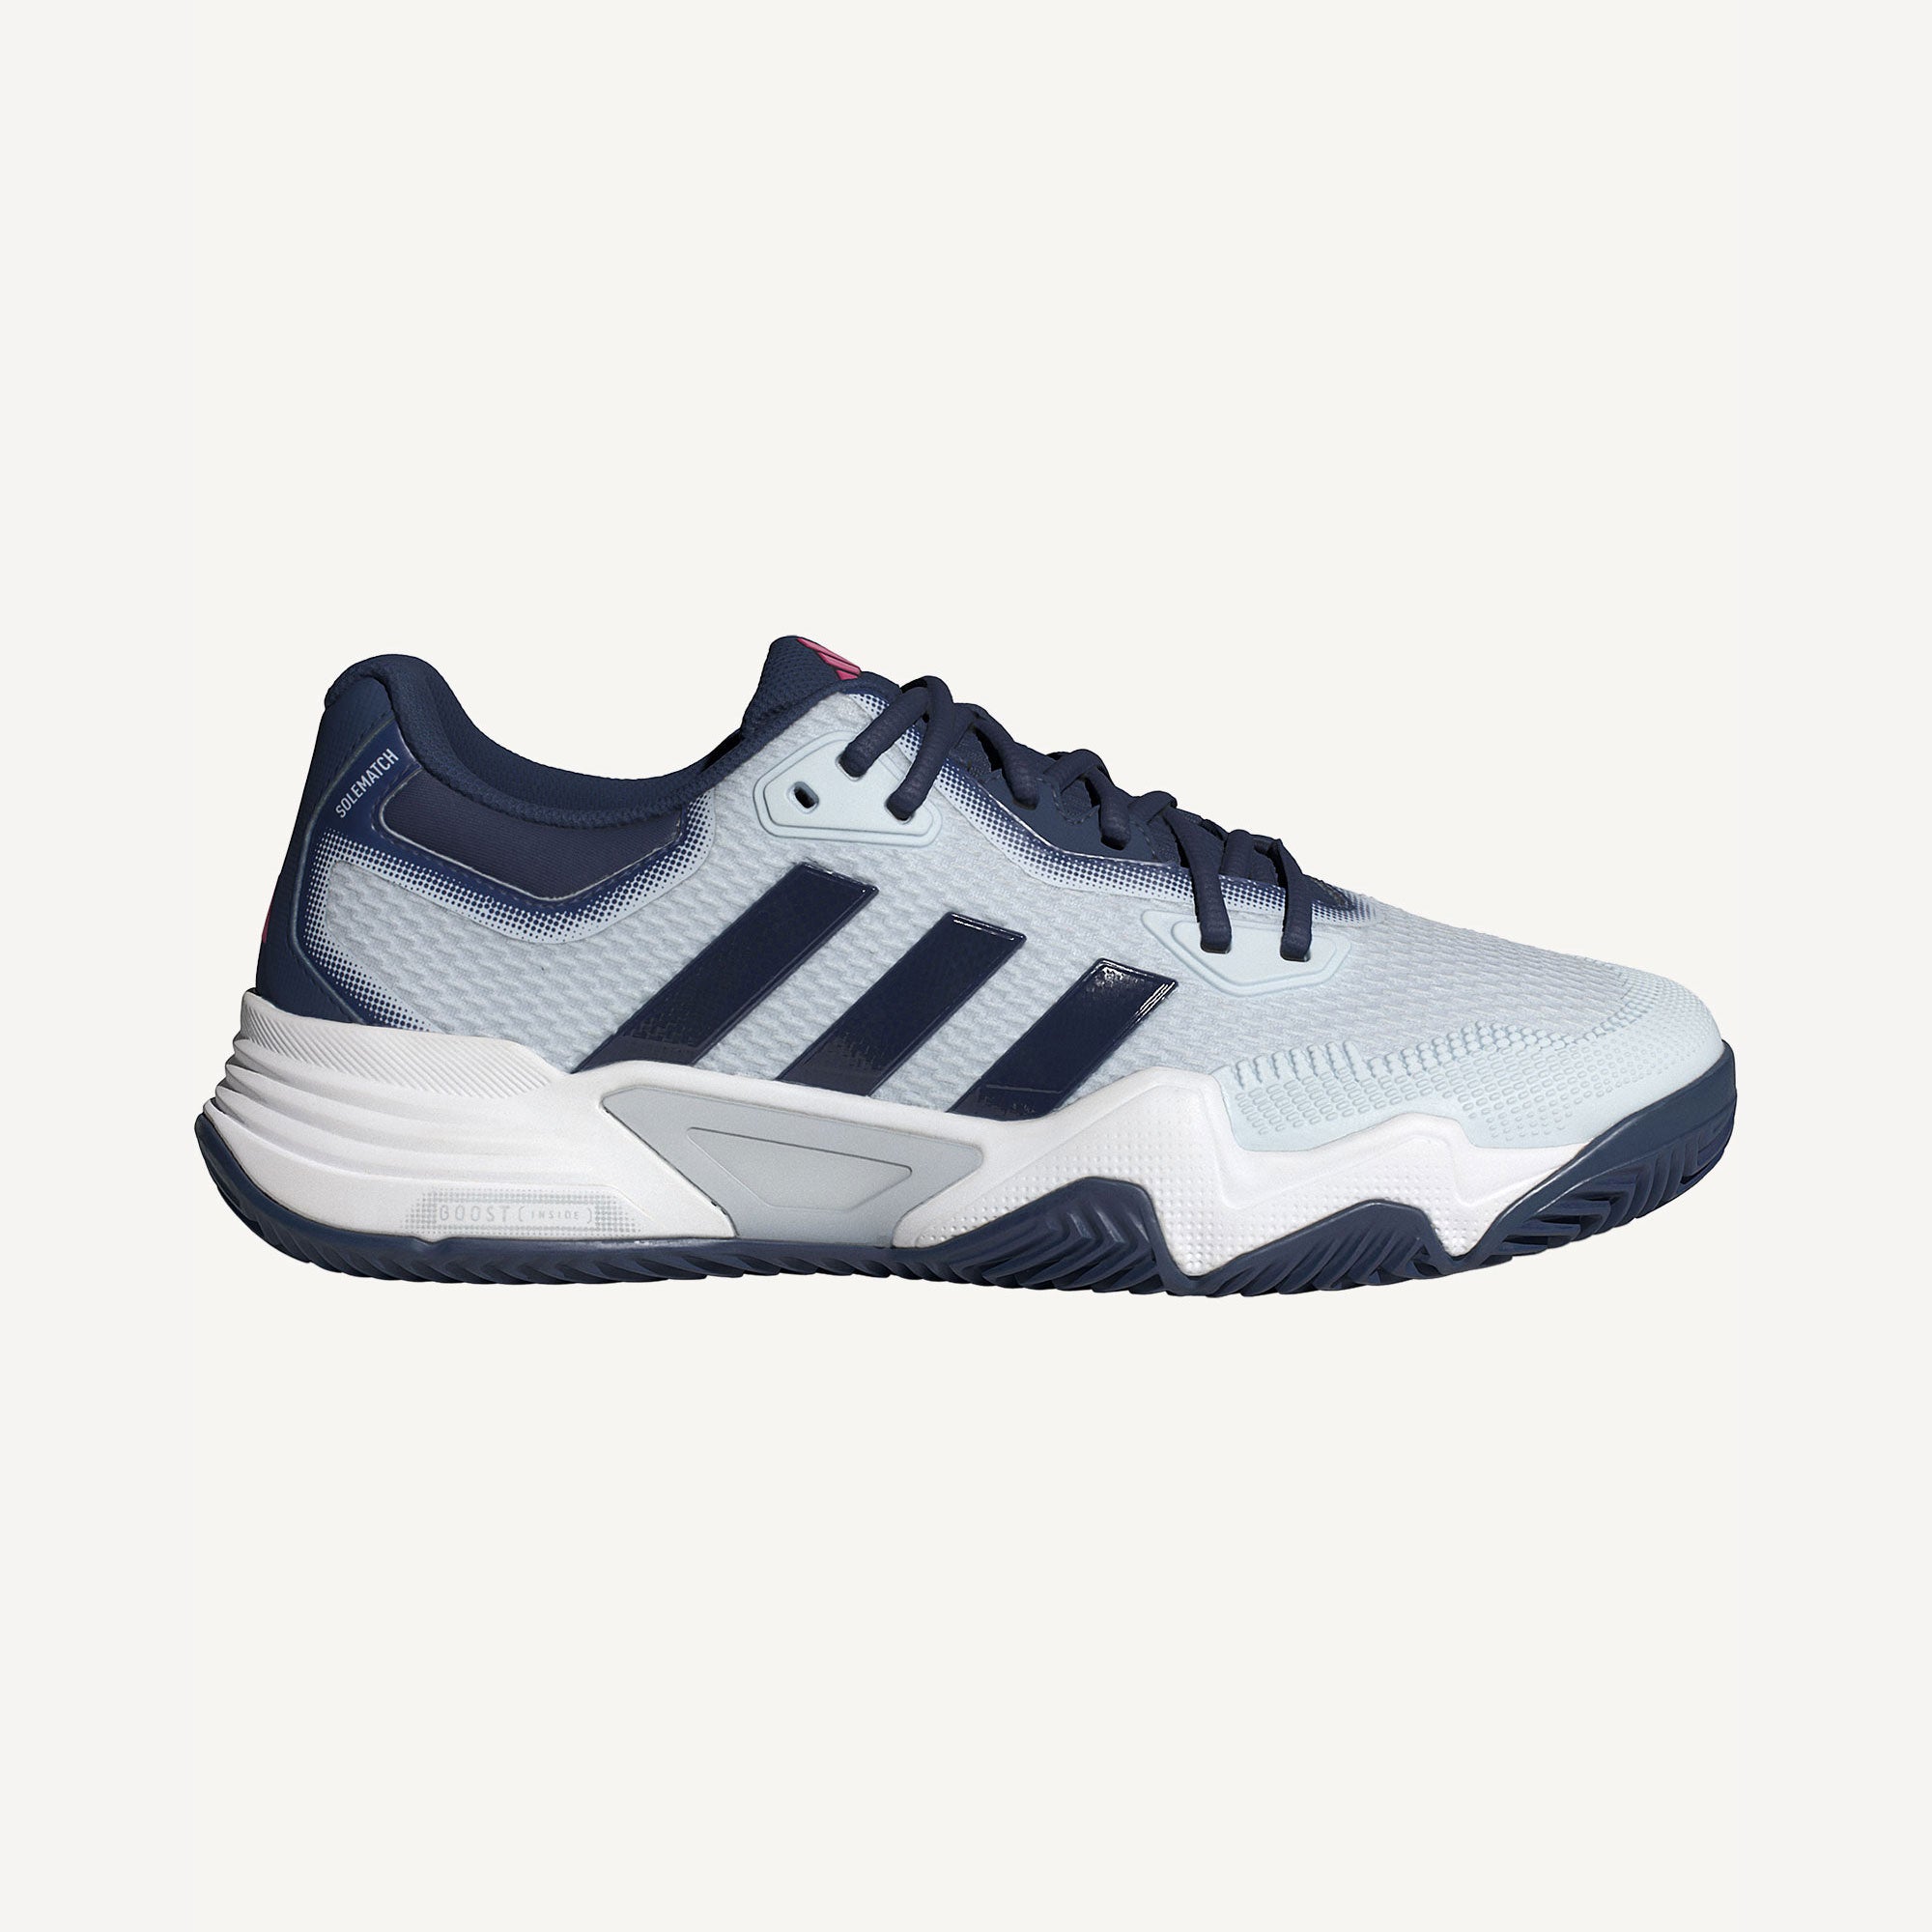 adidas SoleMatch Control 2 Boost Men's Clay Court Tennis Shoes - Blue (1)